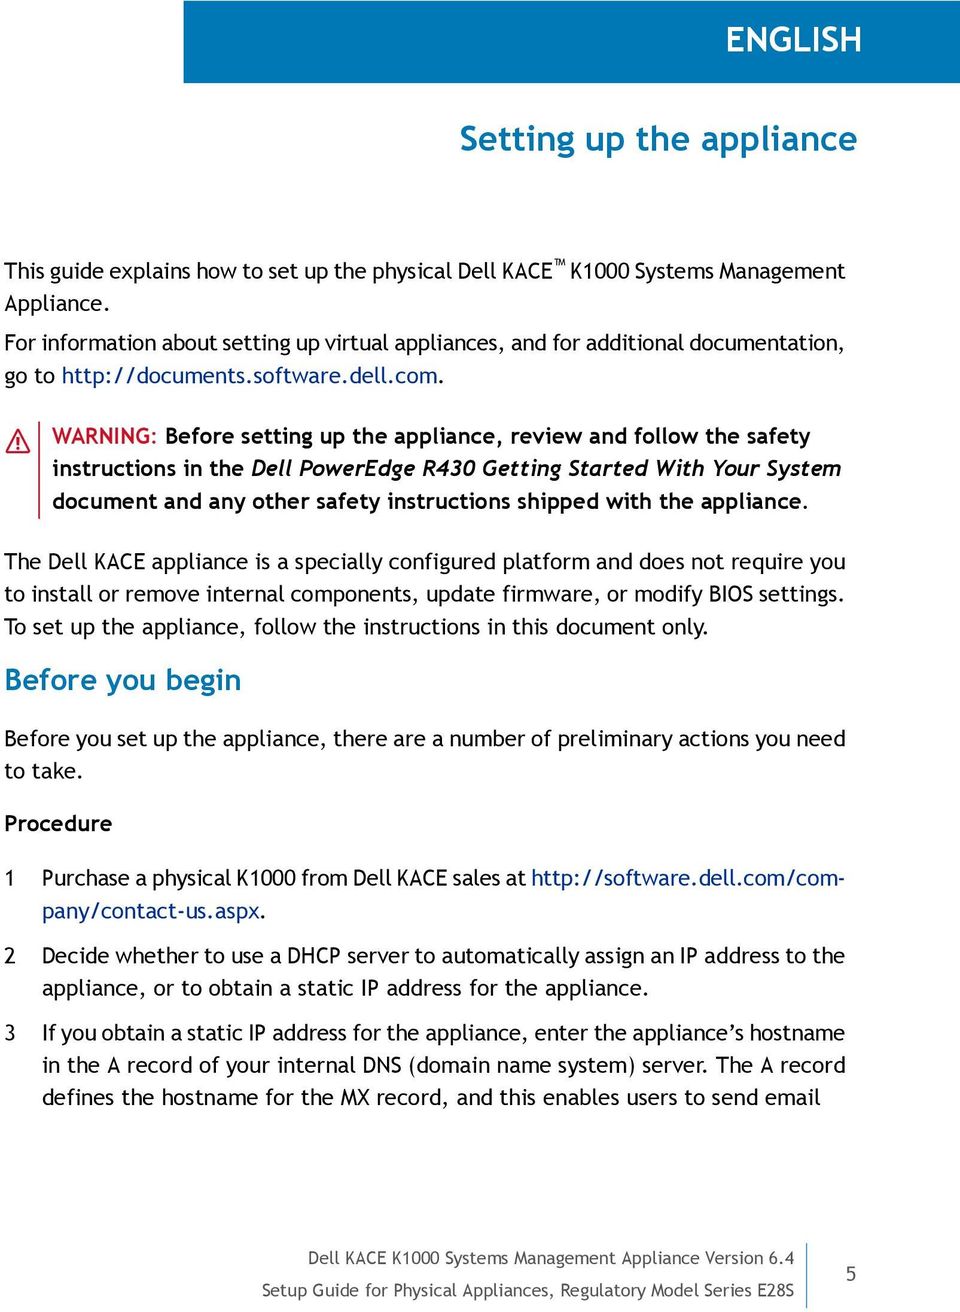 WARNING: Before setting up the appliance, review and follow the safety instructions in the Dell PowerEdge R430 Getting Started With Your System document and any other safety instructions shipped with